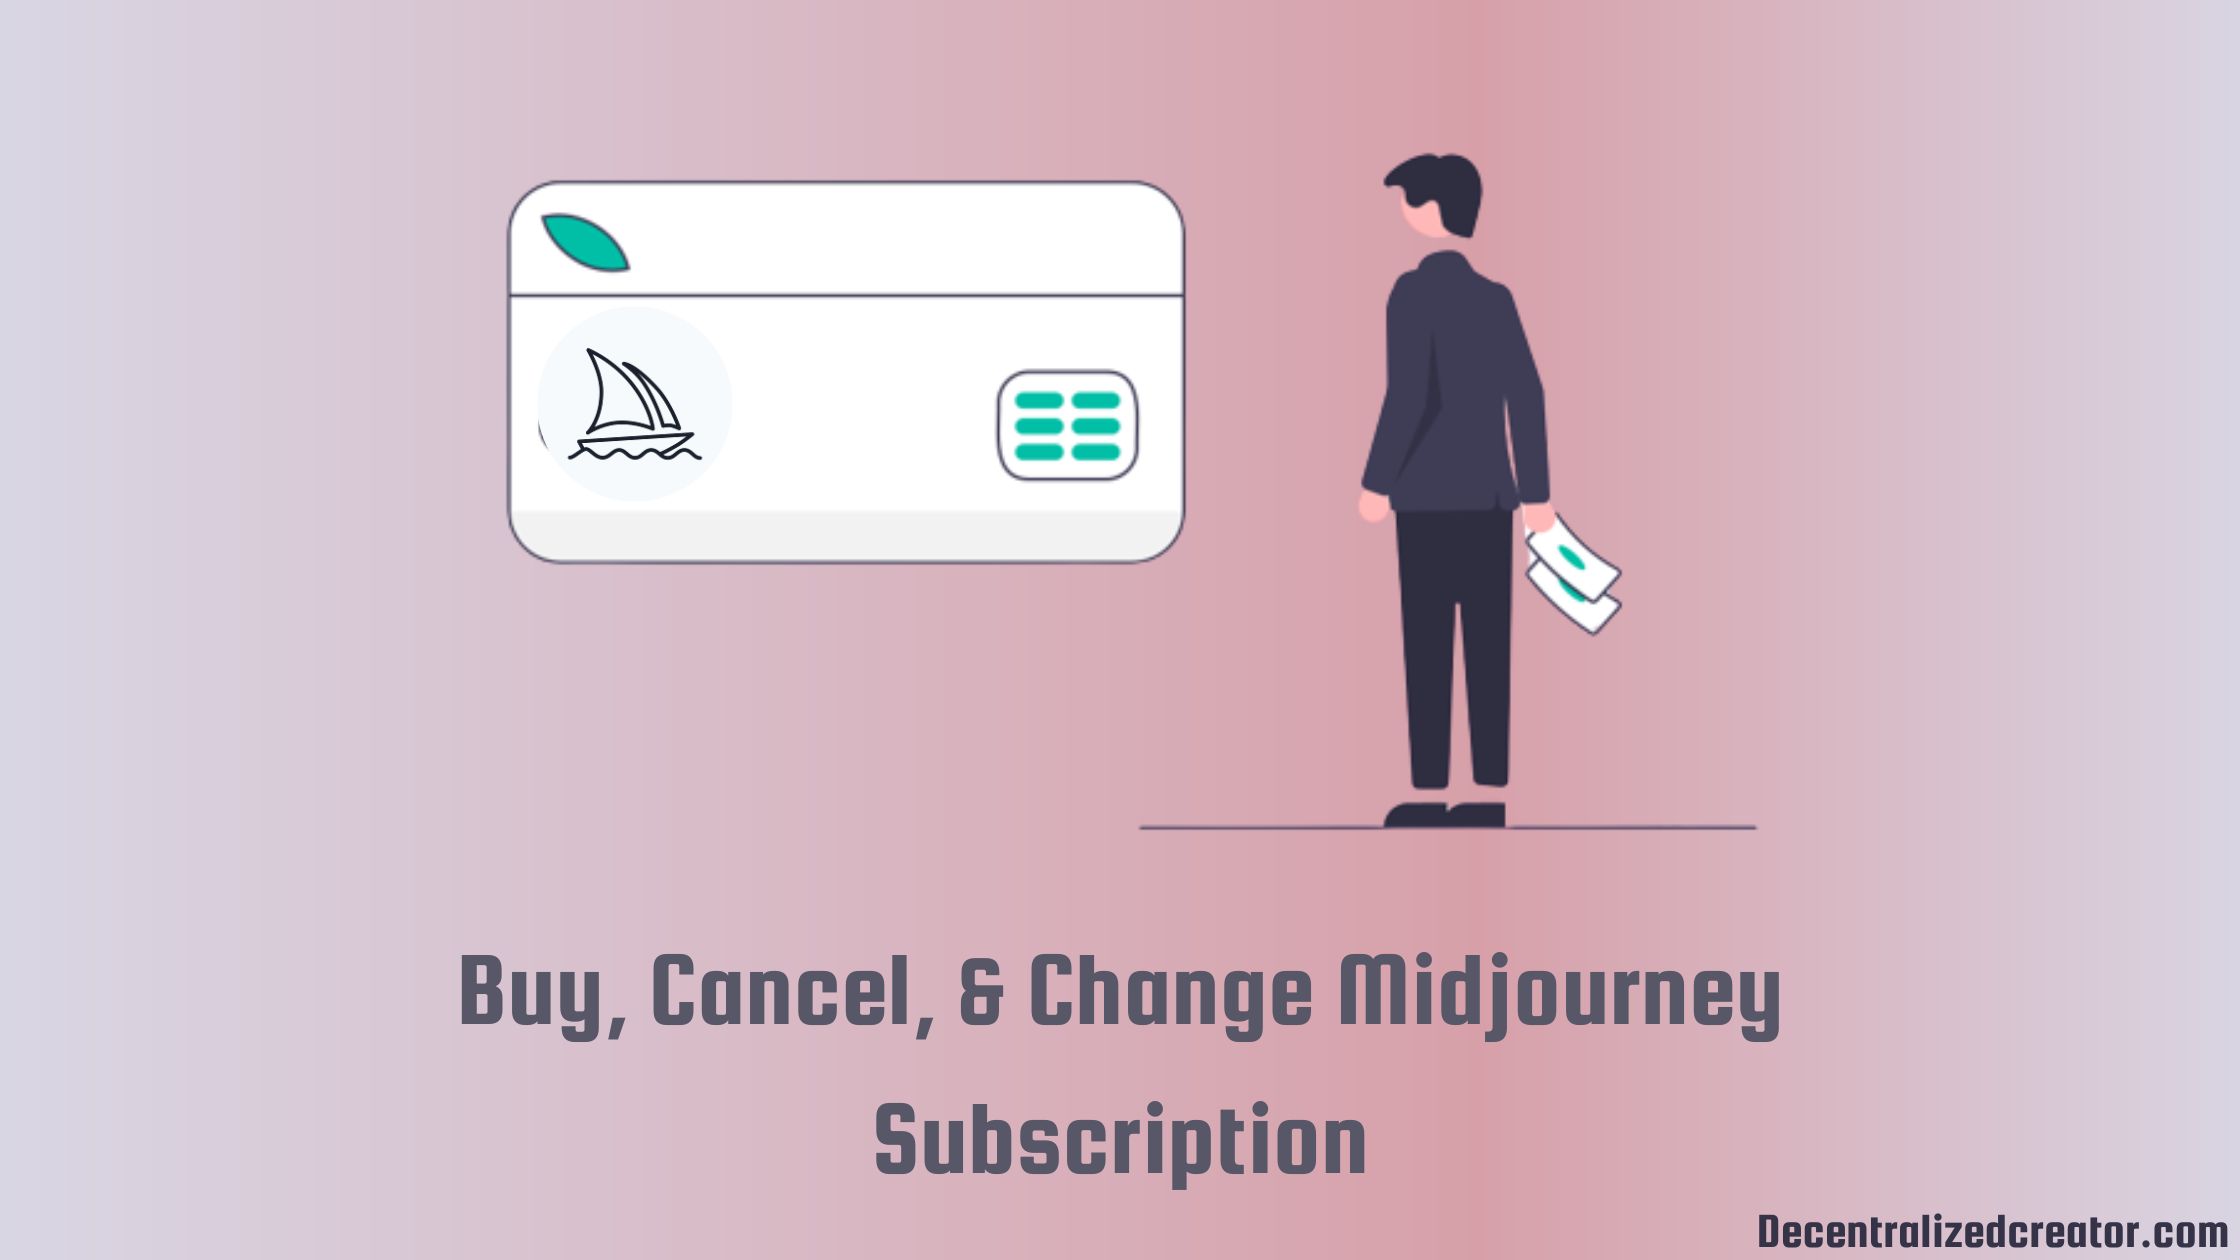 How to Buy, Cancel, & Change Midjourney Subscription